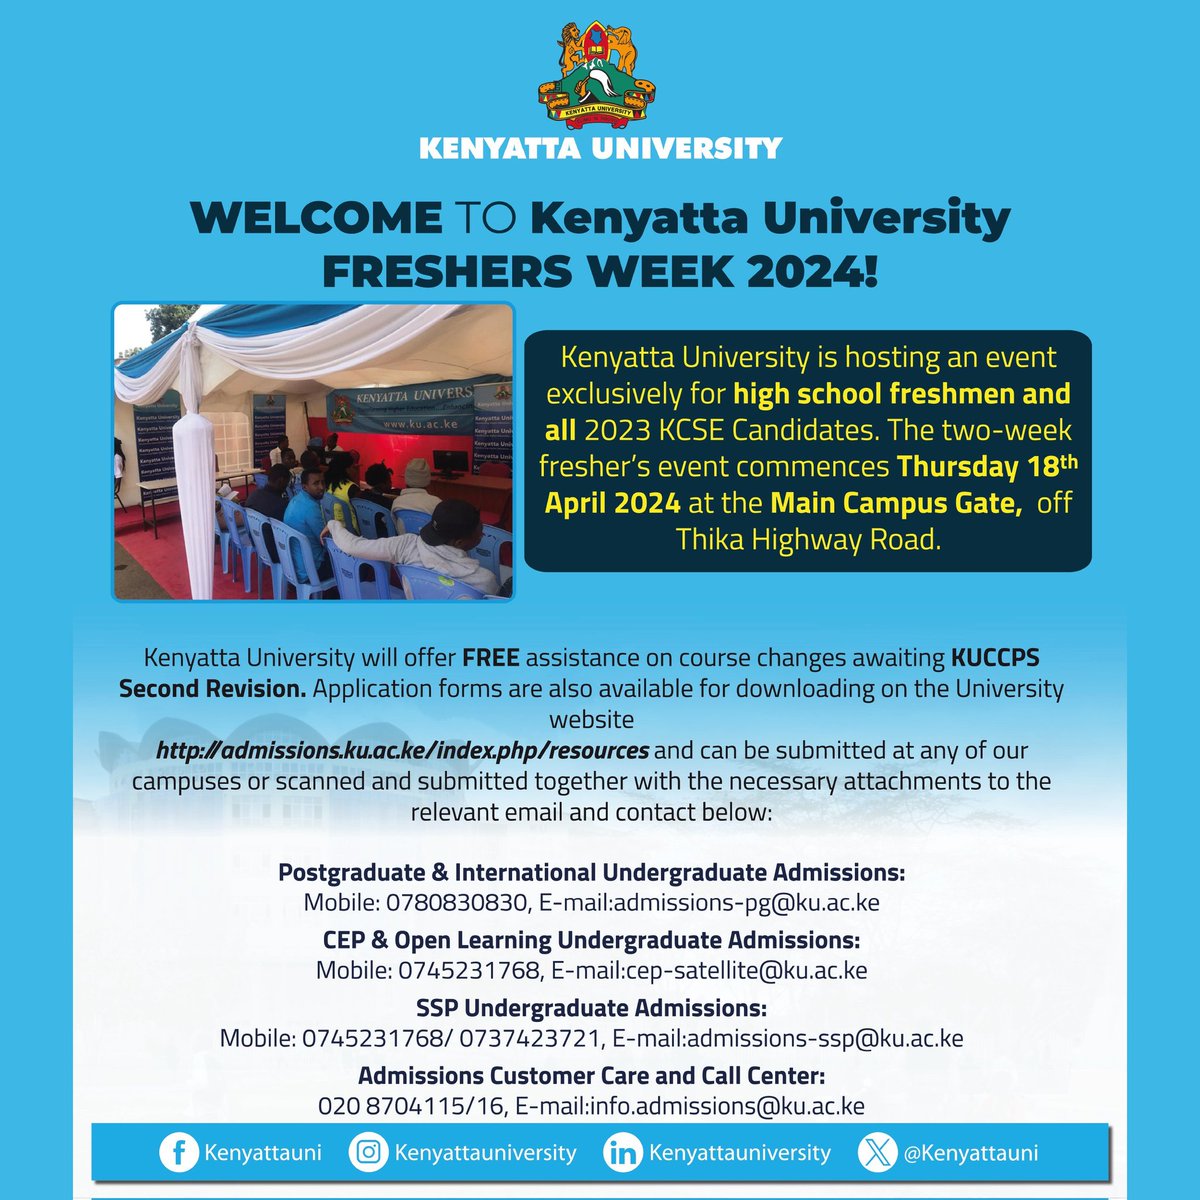 Freshers' week is the perfect time to explore your interests and career aspirations. Stop by Kenyatta University's main campus gate for expert advice on choosing the right academic path.
Check out ku.ac.ke now for more information 
#KUFreshersWeek